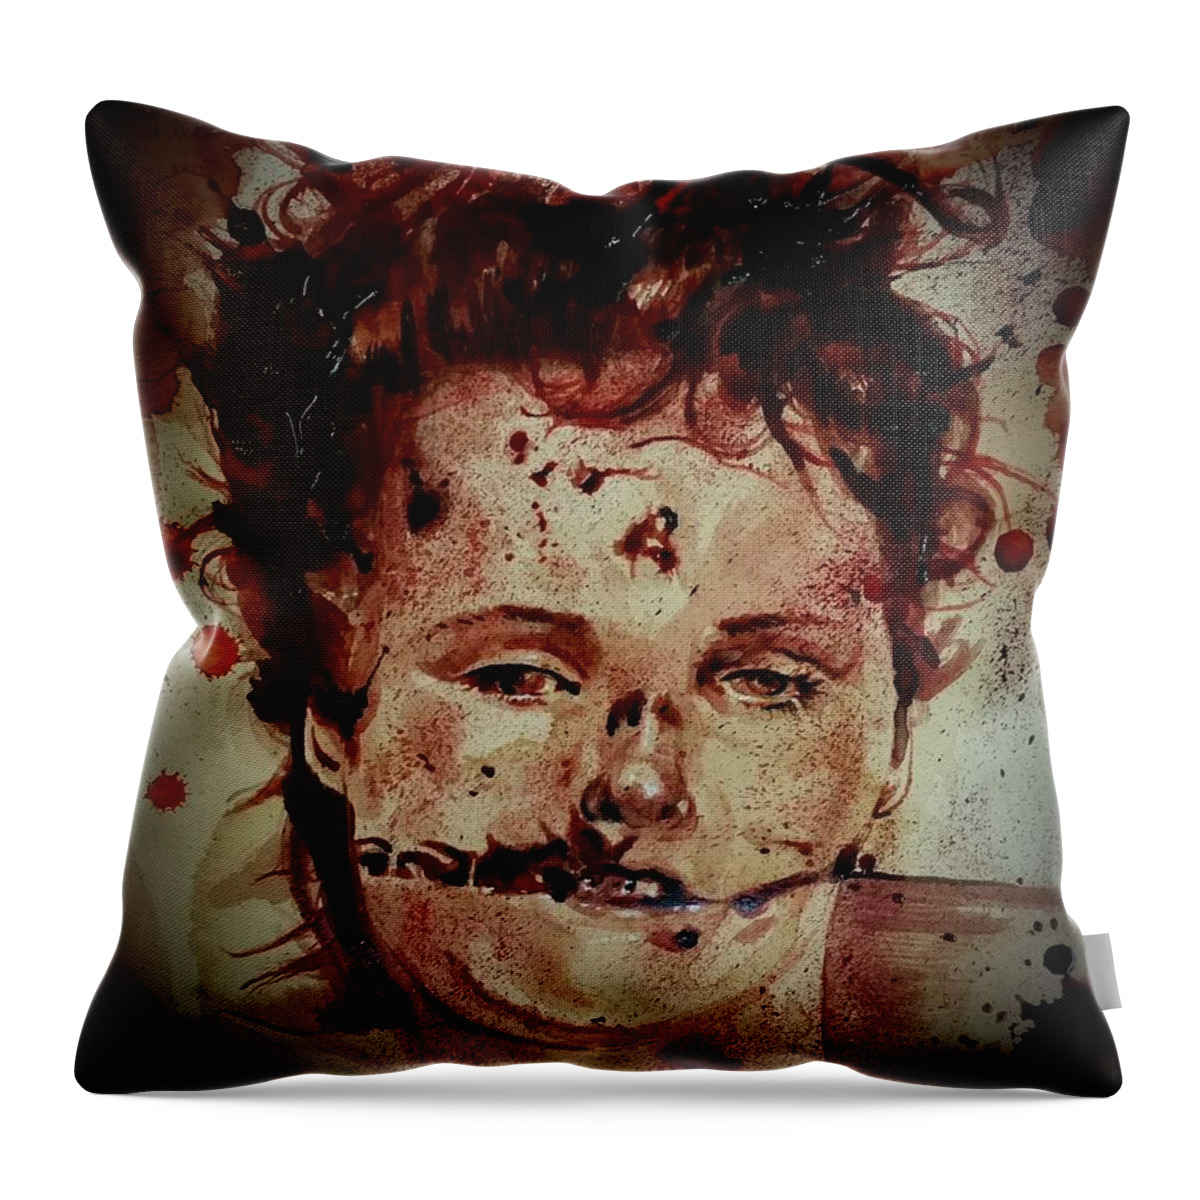 Ryan Almighty Throw Pillow featuring the painting Black Dahlia by Ryan Almighty